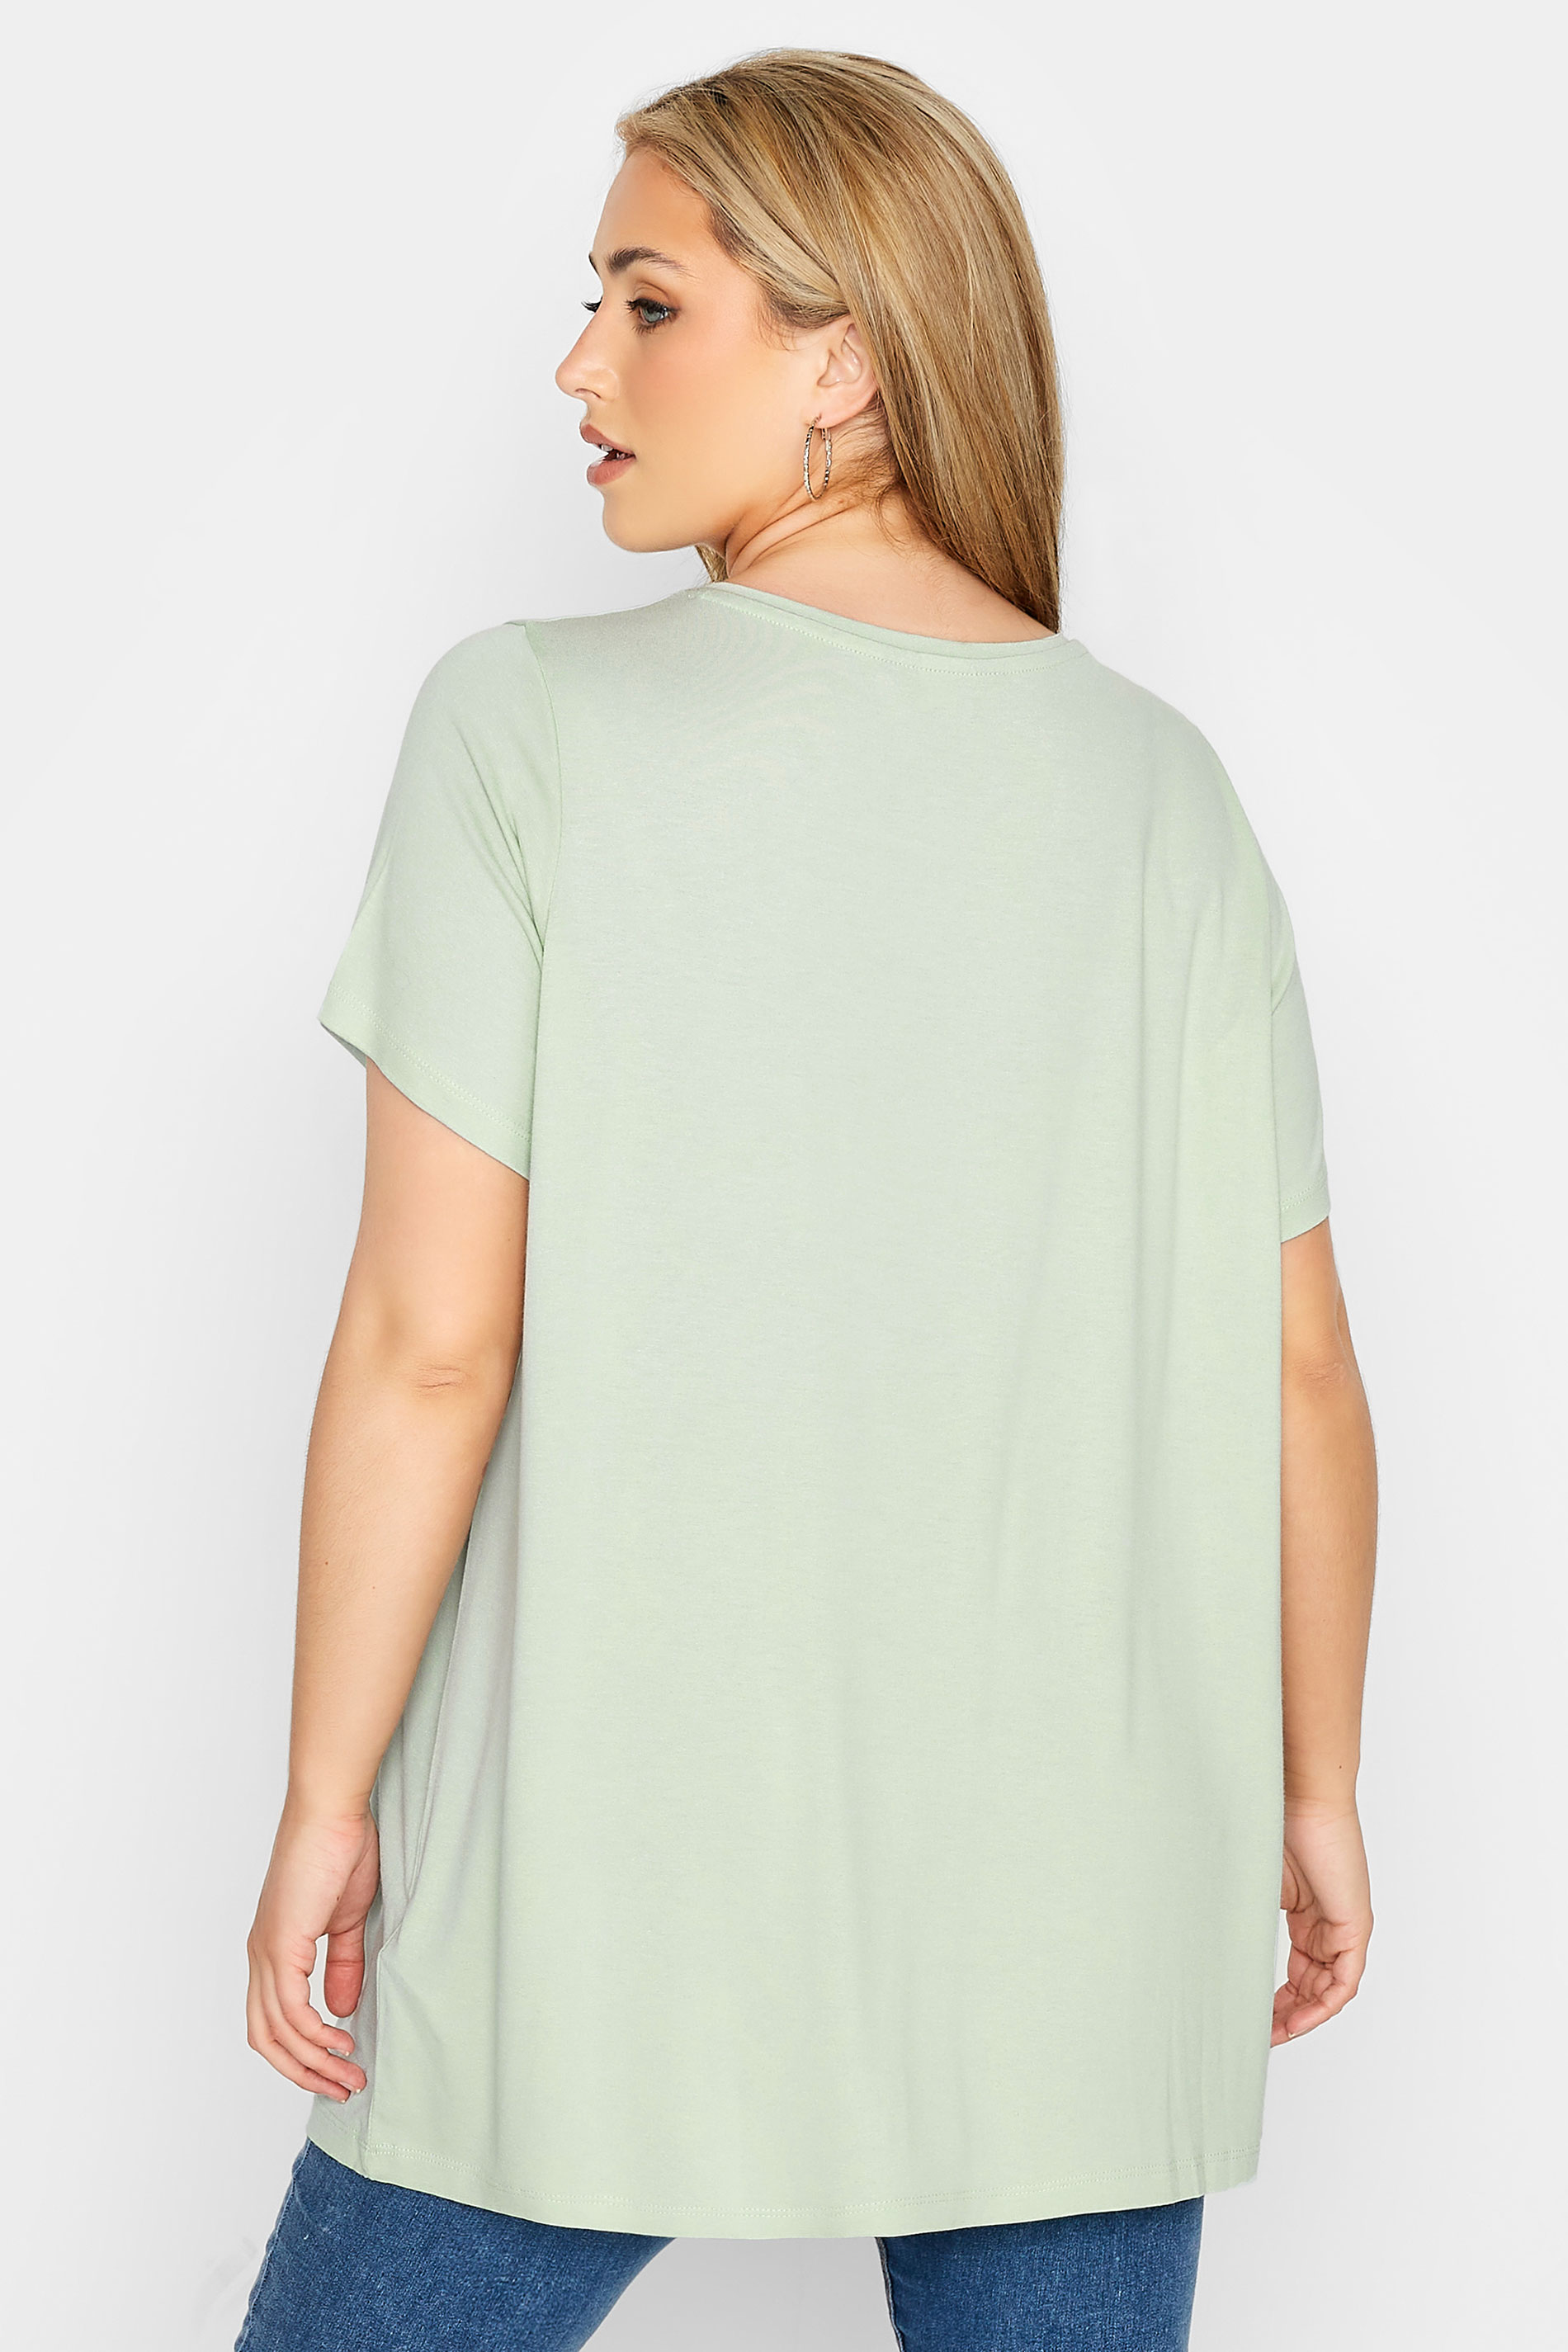 Grande taille  Tops Grande taille  Tops à Slogans | T-Shirt Vert Menthe Papillon 'Only For You' - NH68863